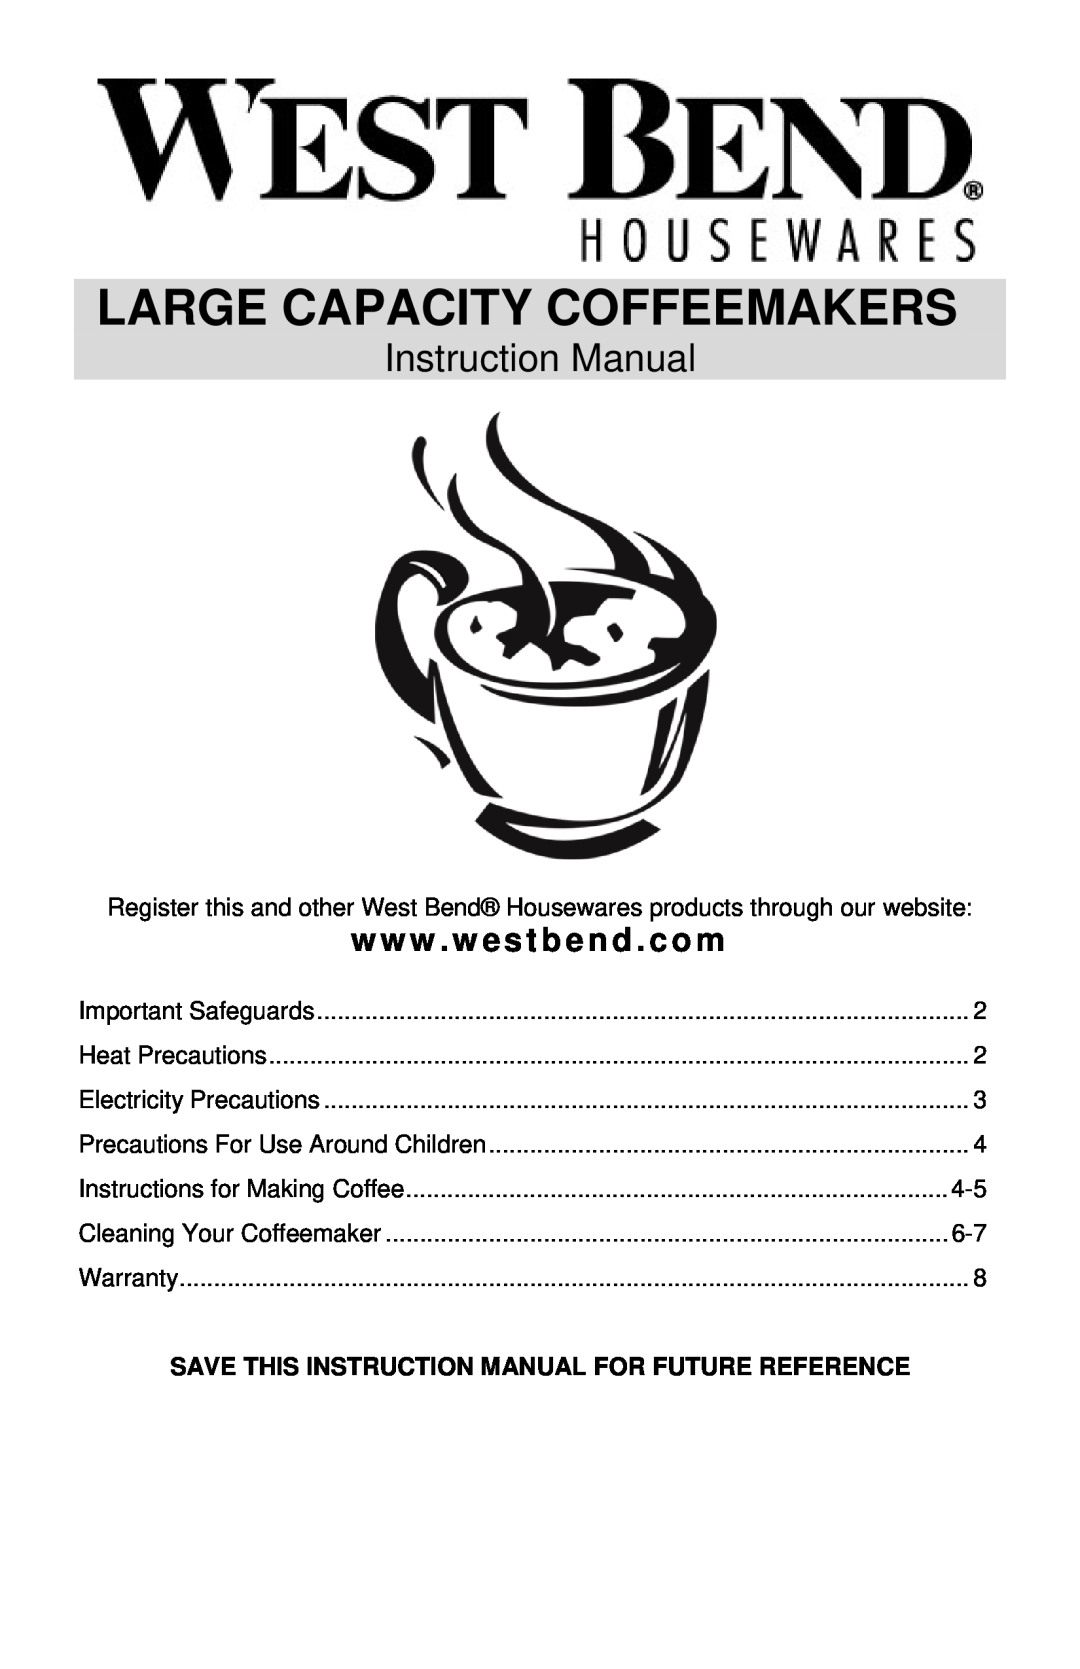 West Bend LARGE CAPACITY COFFEEMAKERS instruction manual Large Capacity Coffeemakers, Instruction Manual 